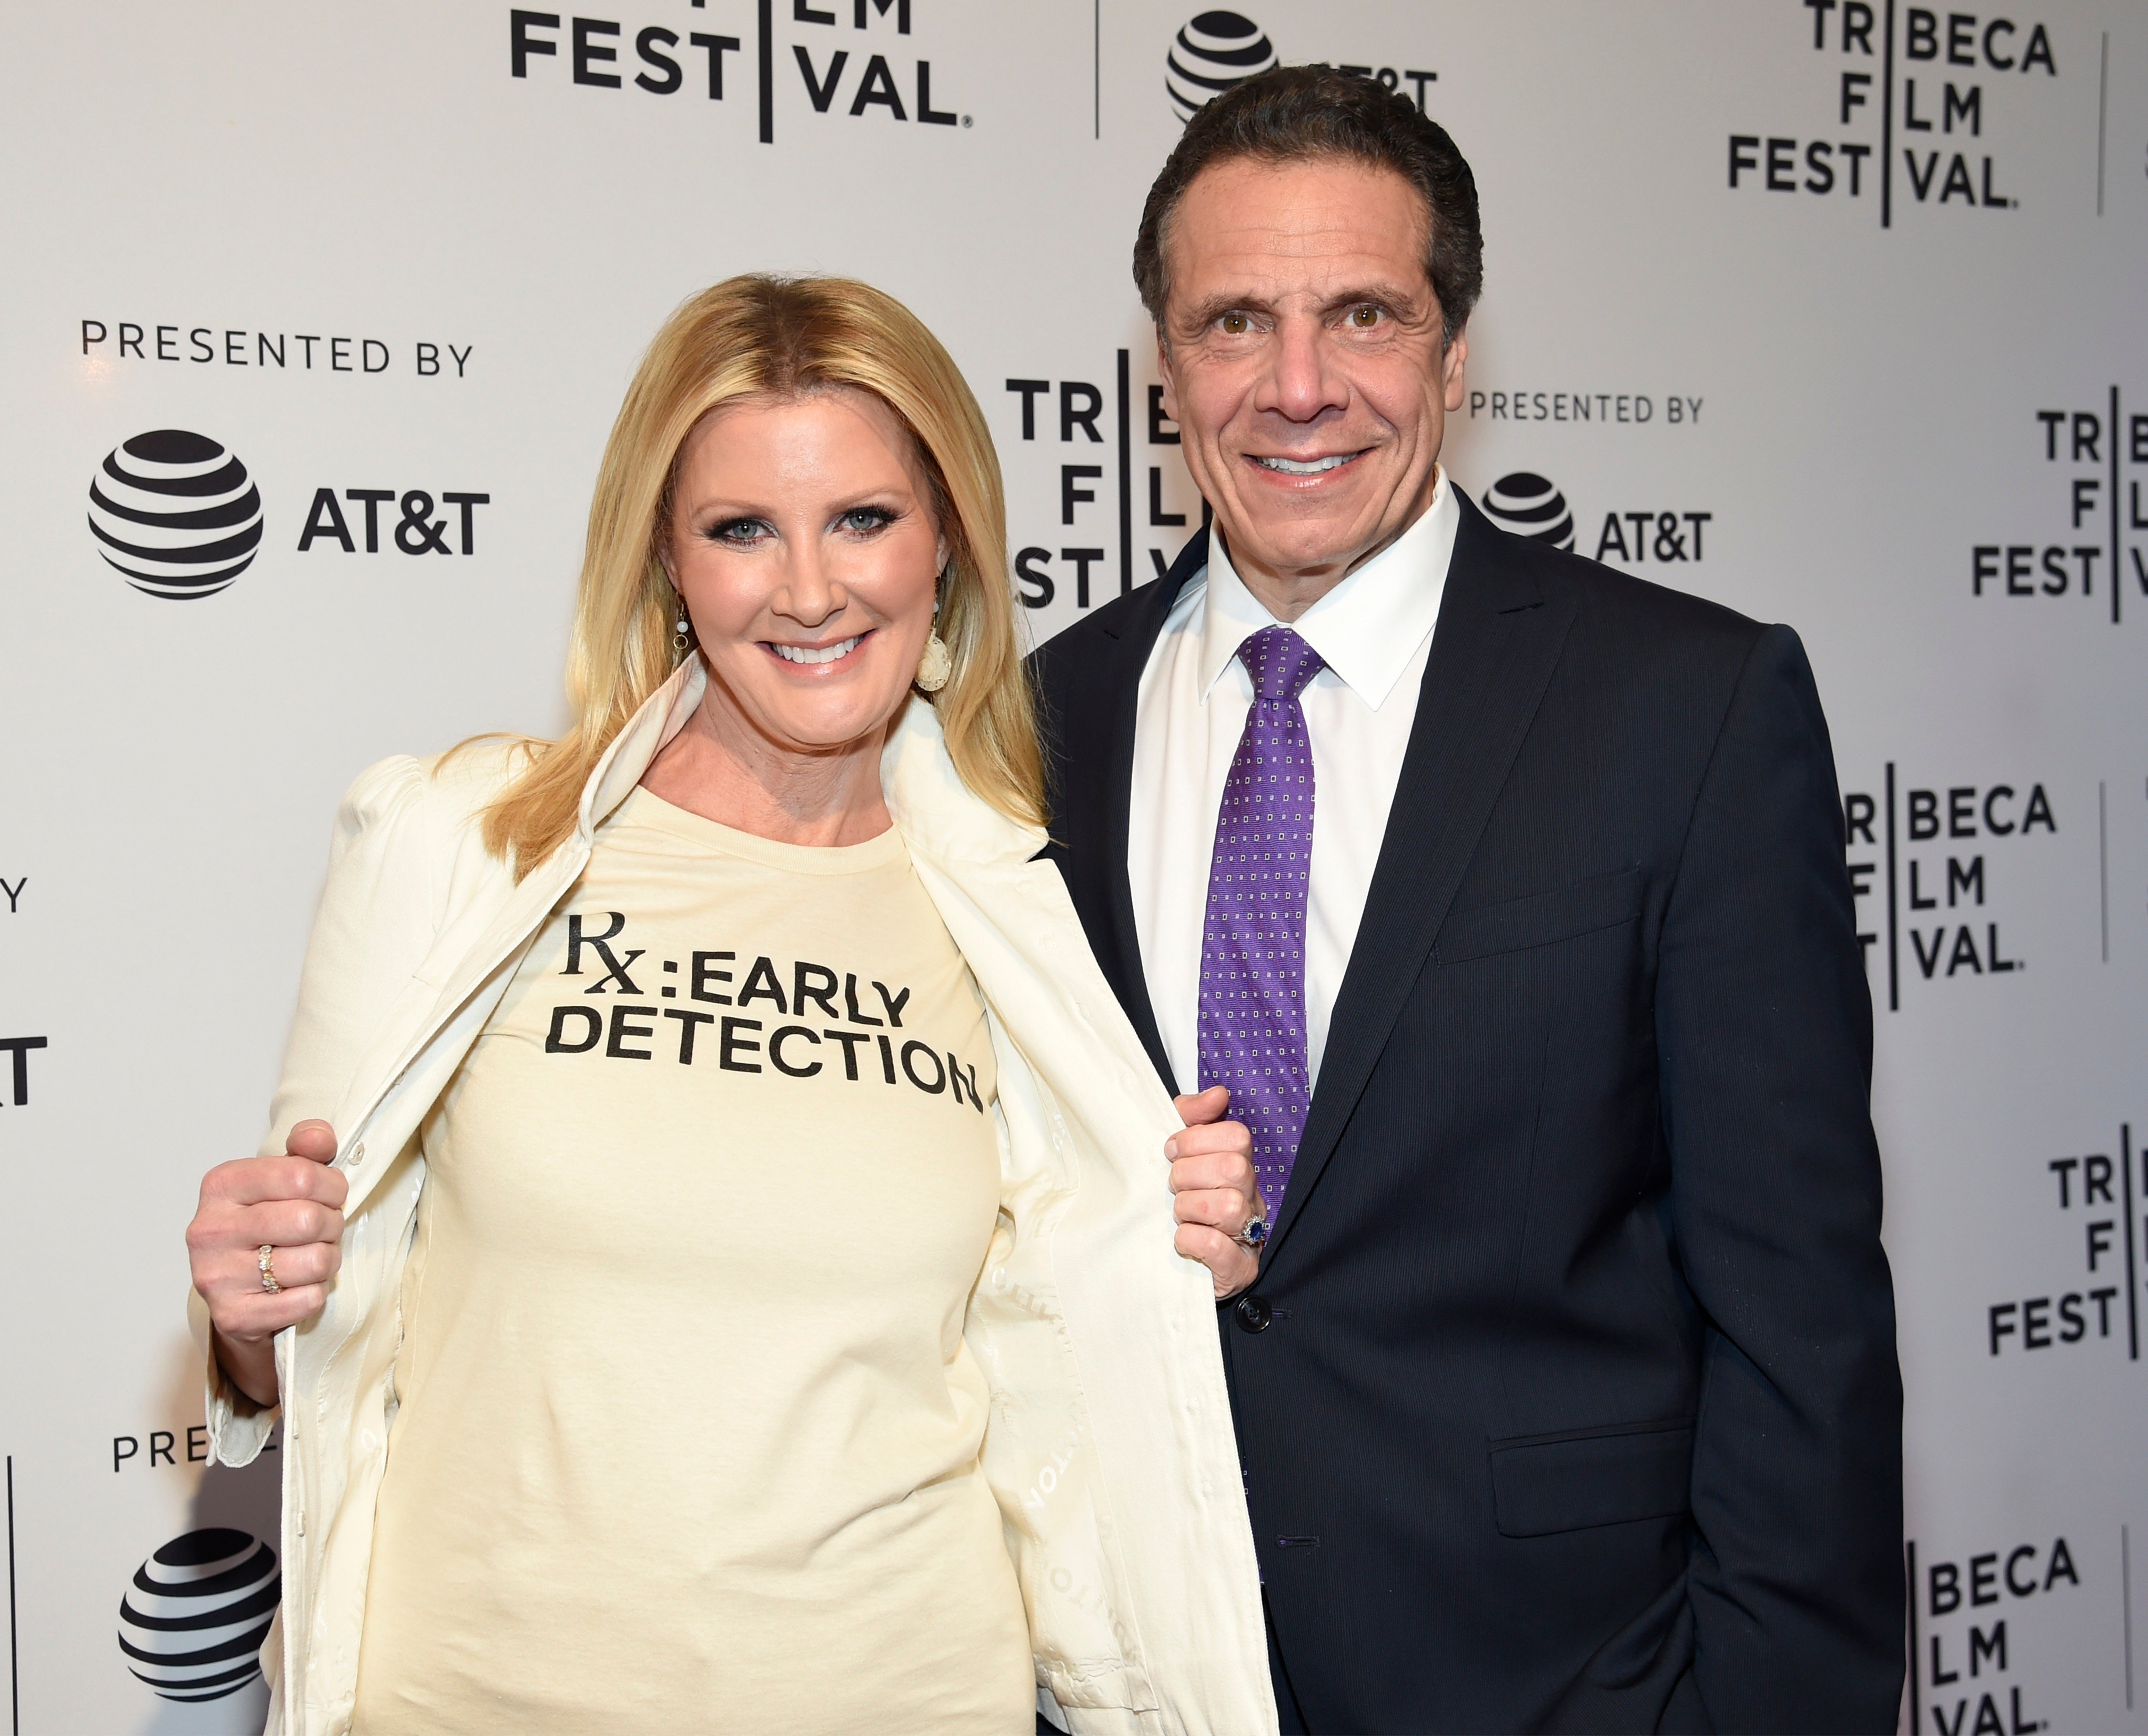 Why Didn't Sandra Lee and Andrew Cuomo Ever Get Married?